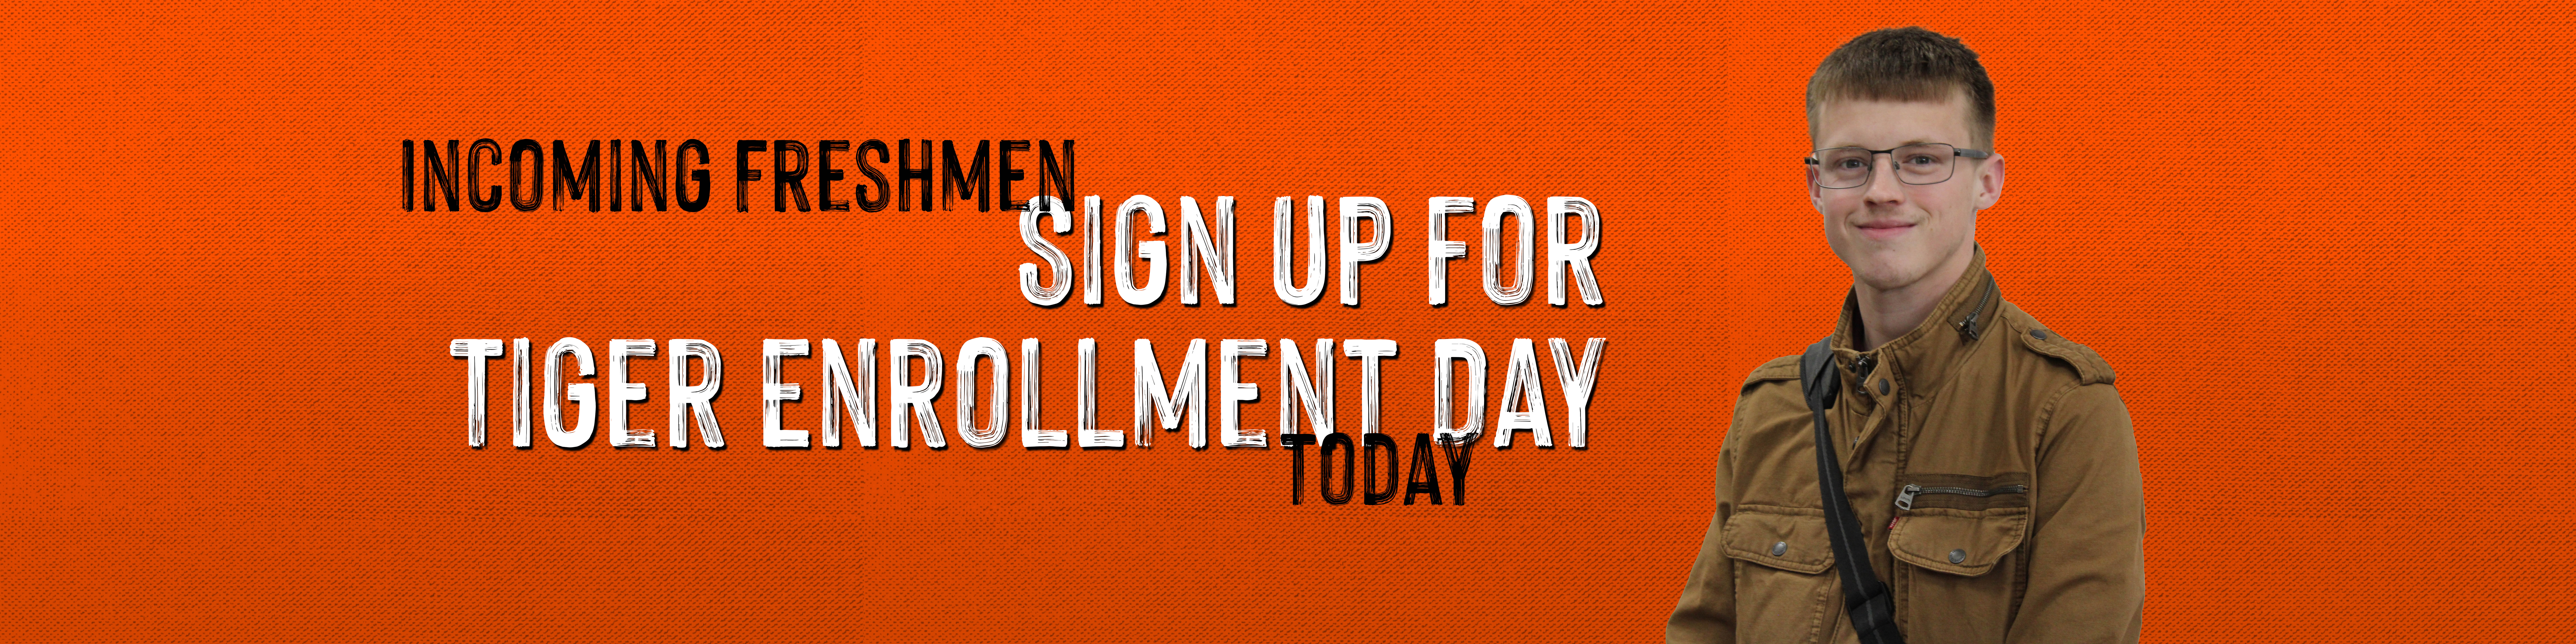 Incoming freshmen sign up for Tiger Enrollment Day today